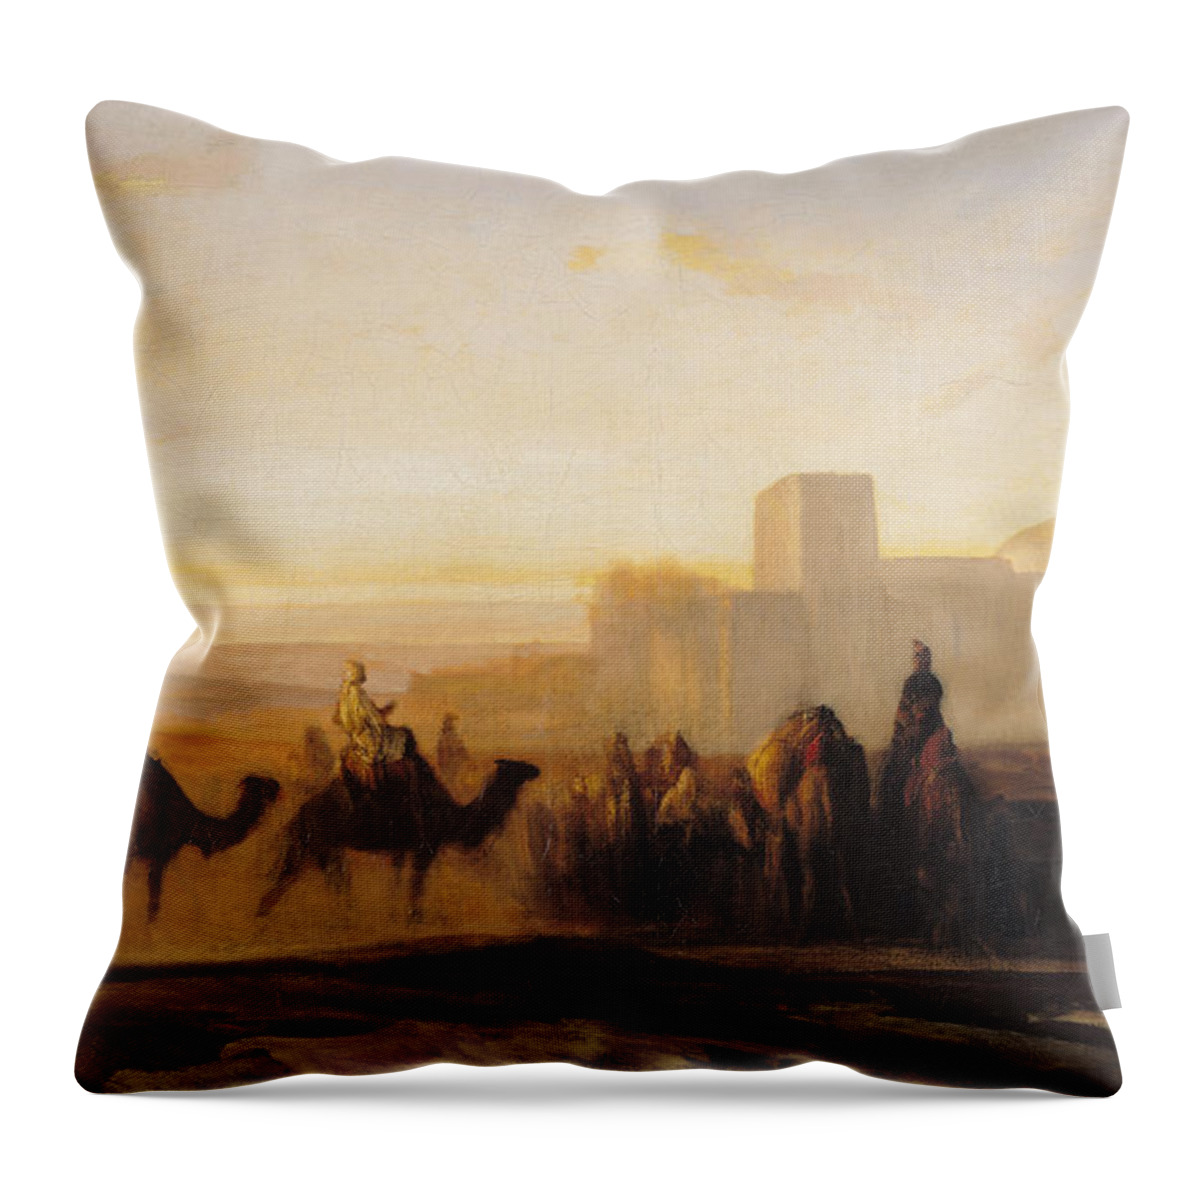 The Throw Pillow featuring the painting The Caravan by Alexandre Gabriel Decamps